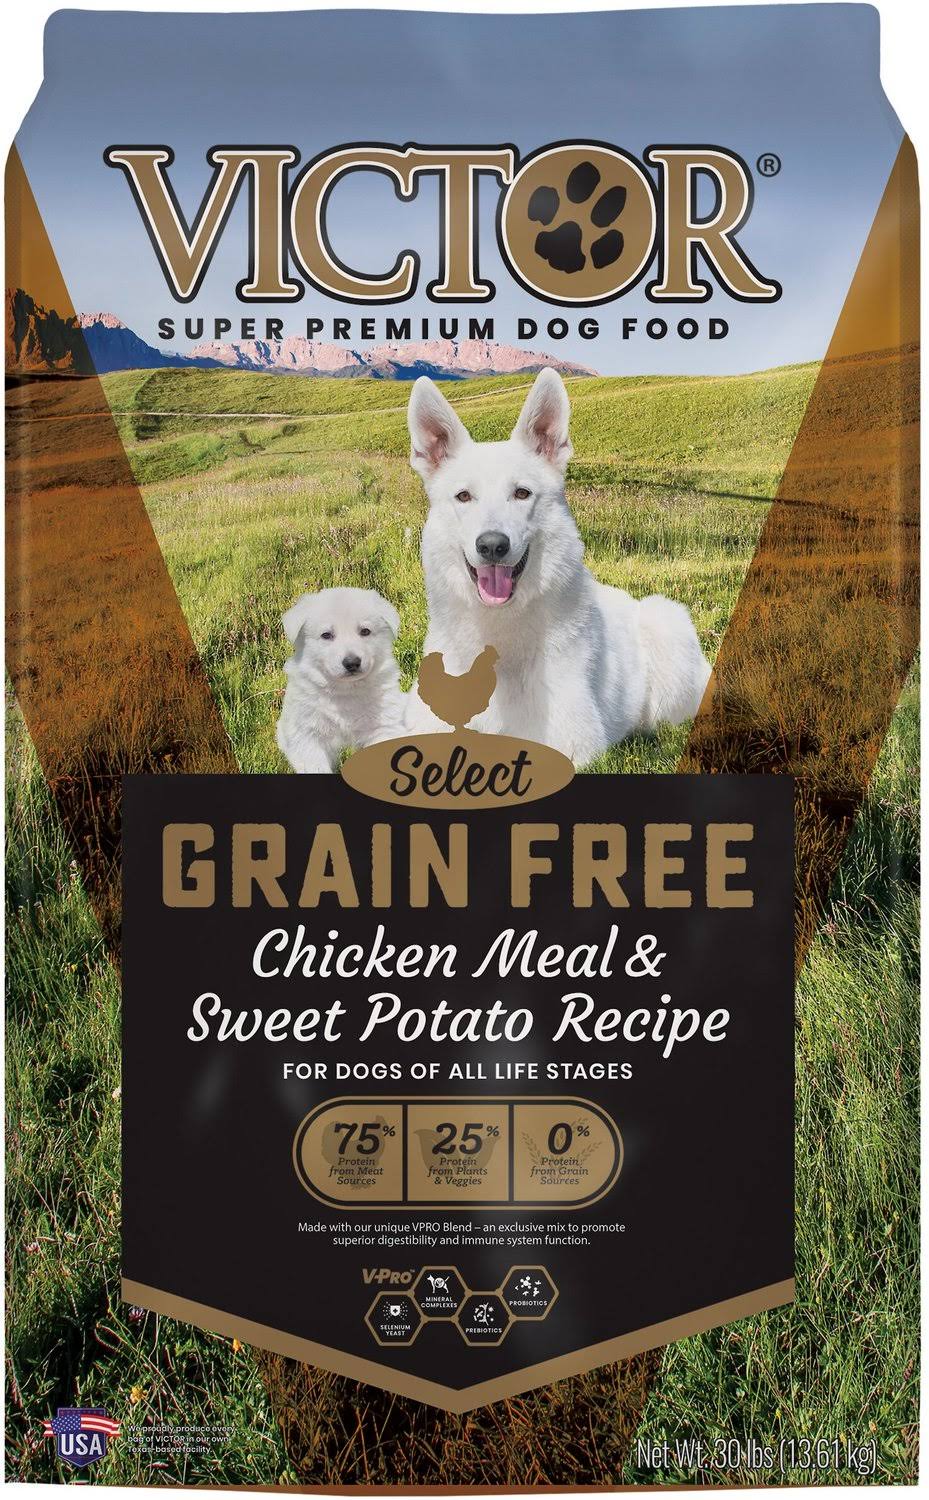 Victor Grain-Free Chicken Meal and Sweet Potato Dog Food - 30lb